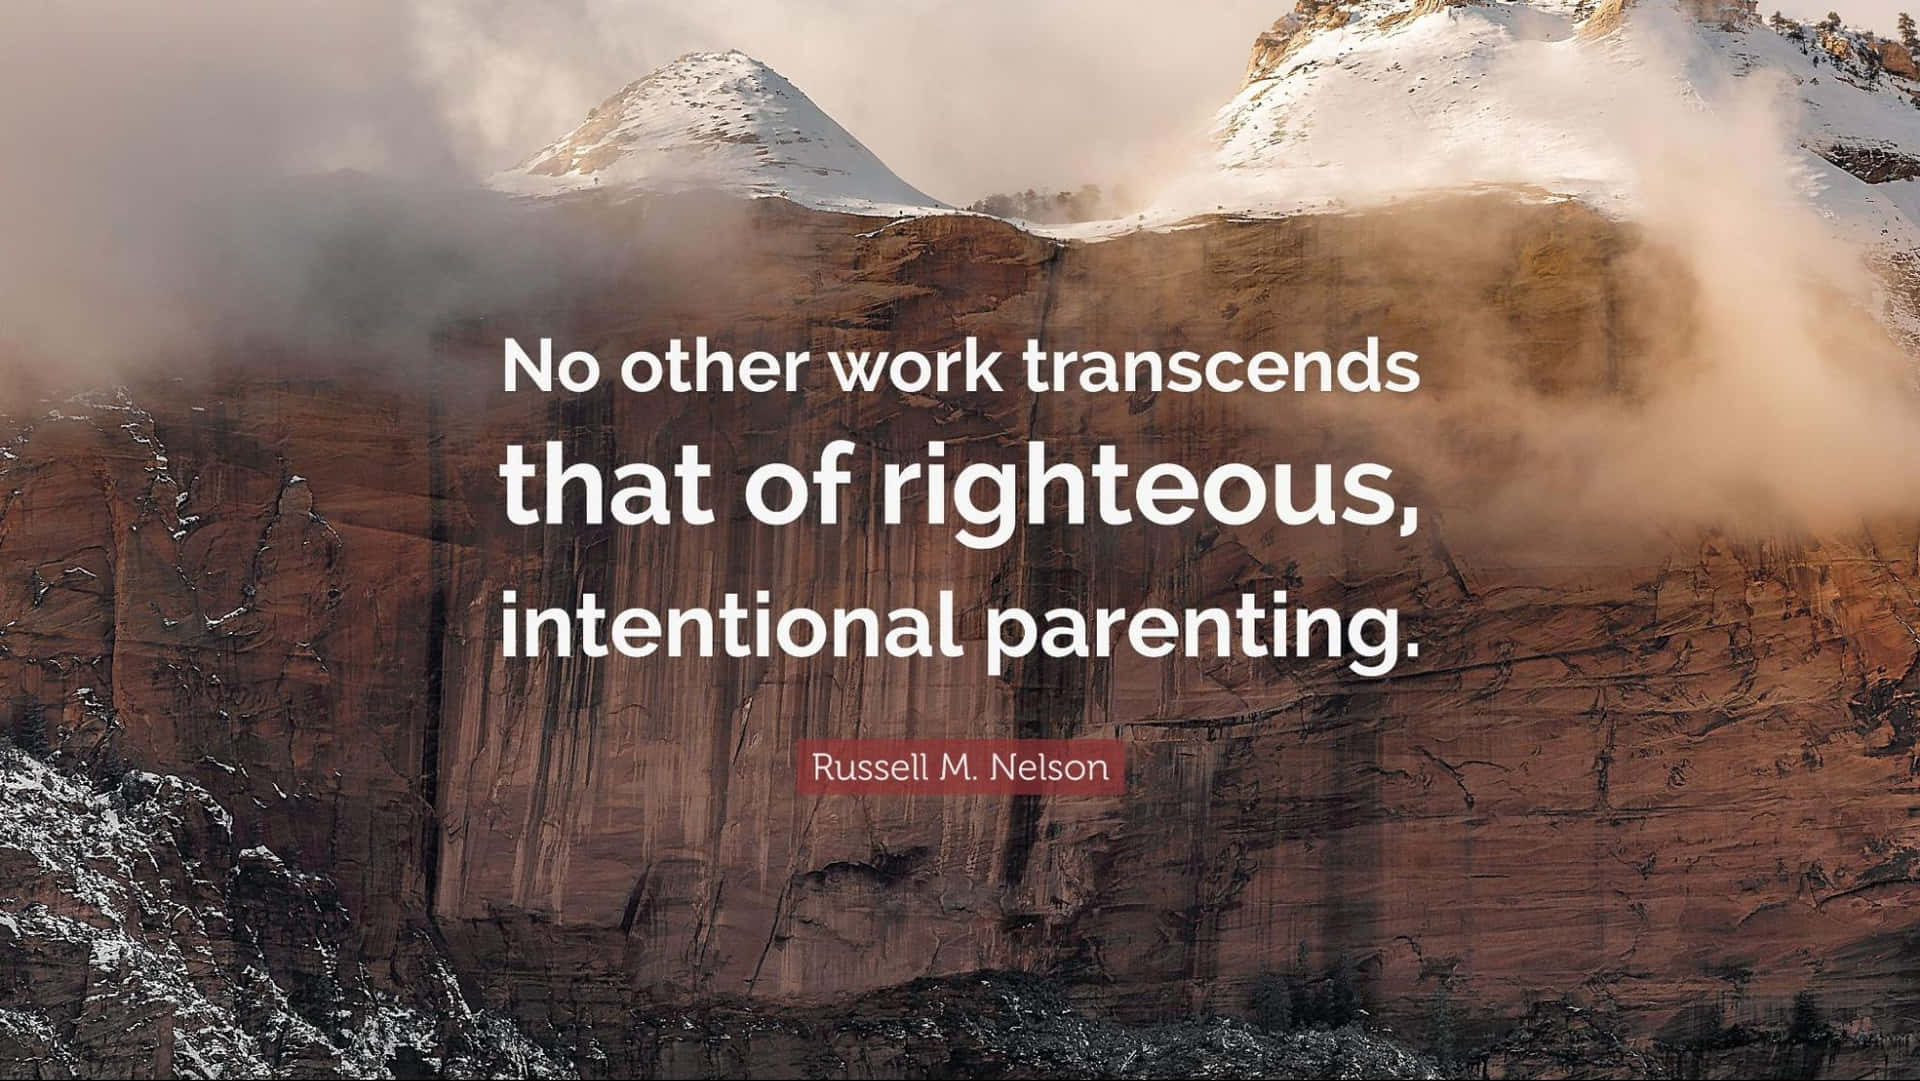 Righteous Intentional Parenting Quote Wallpaper